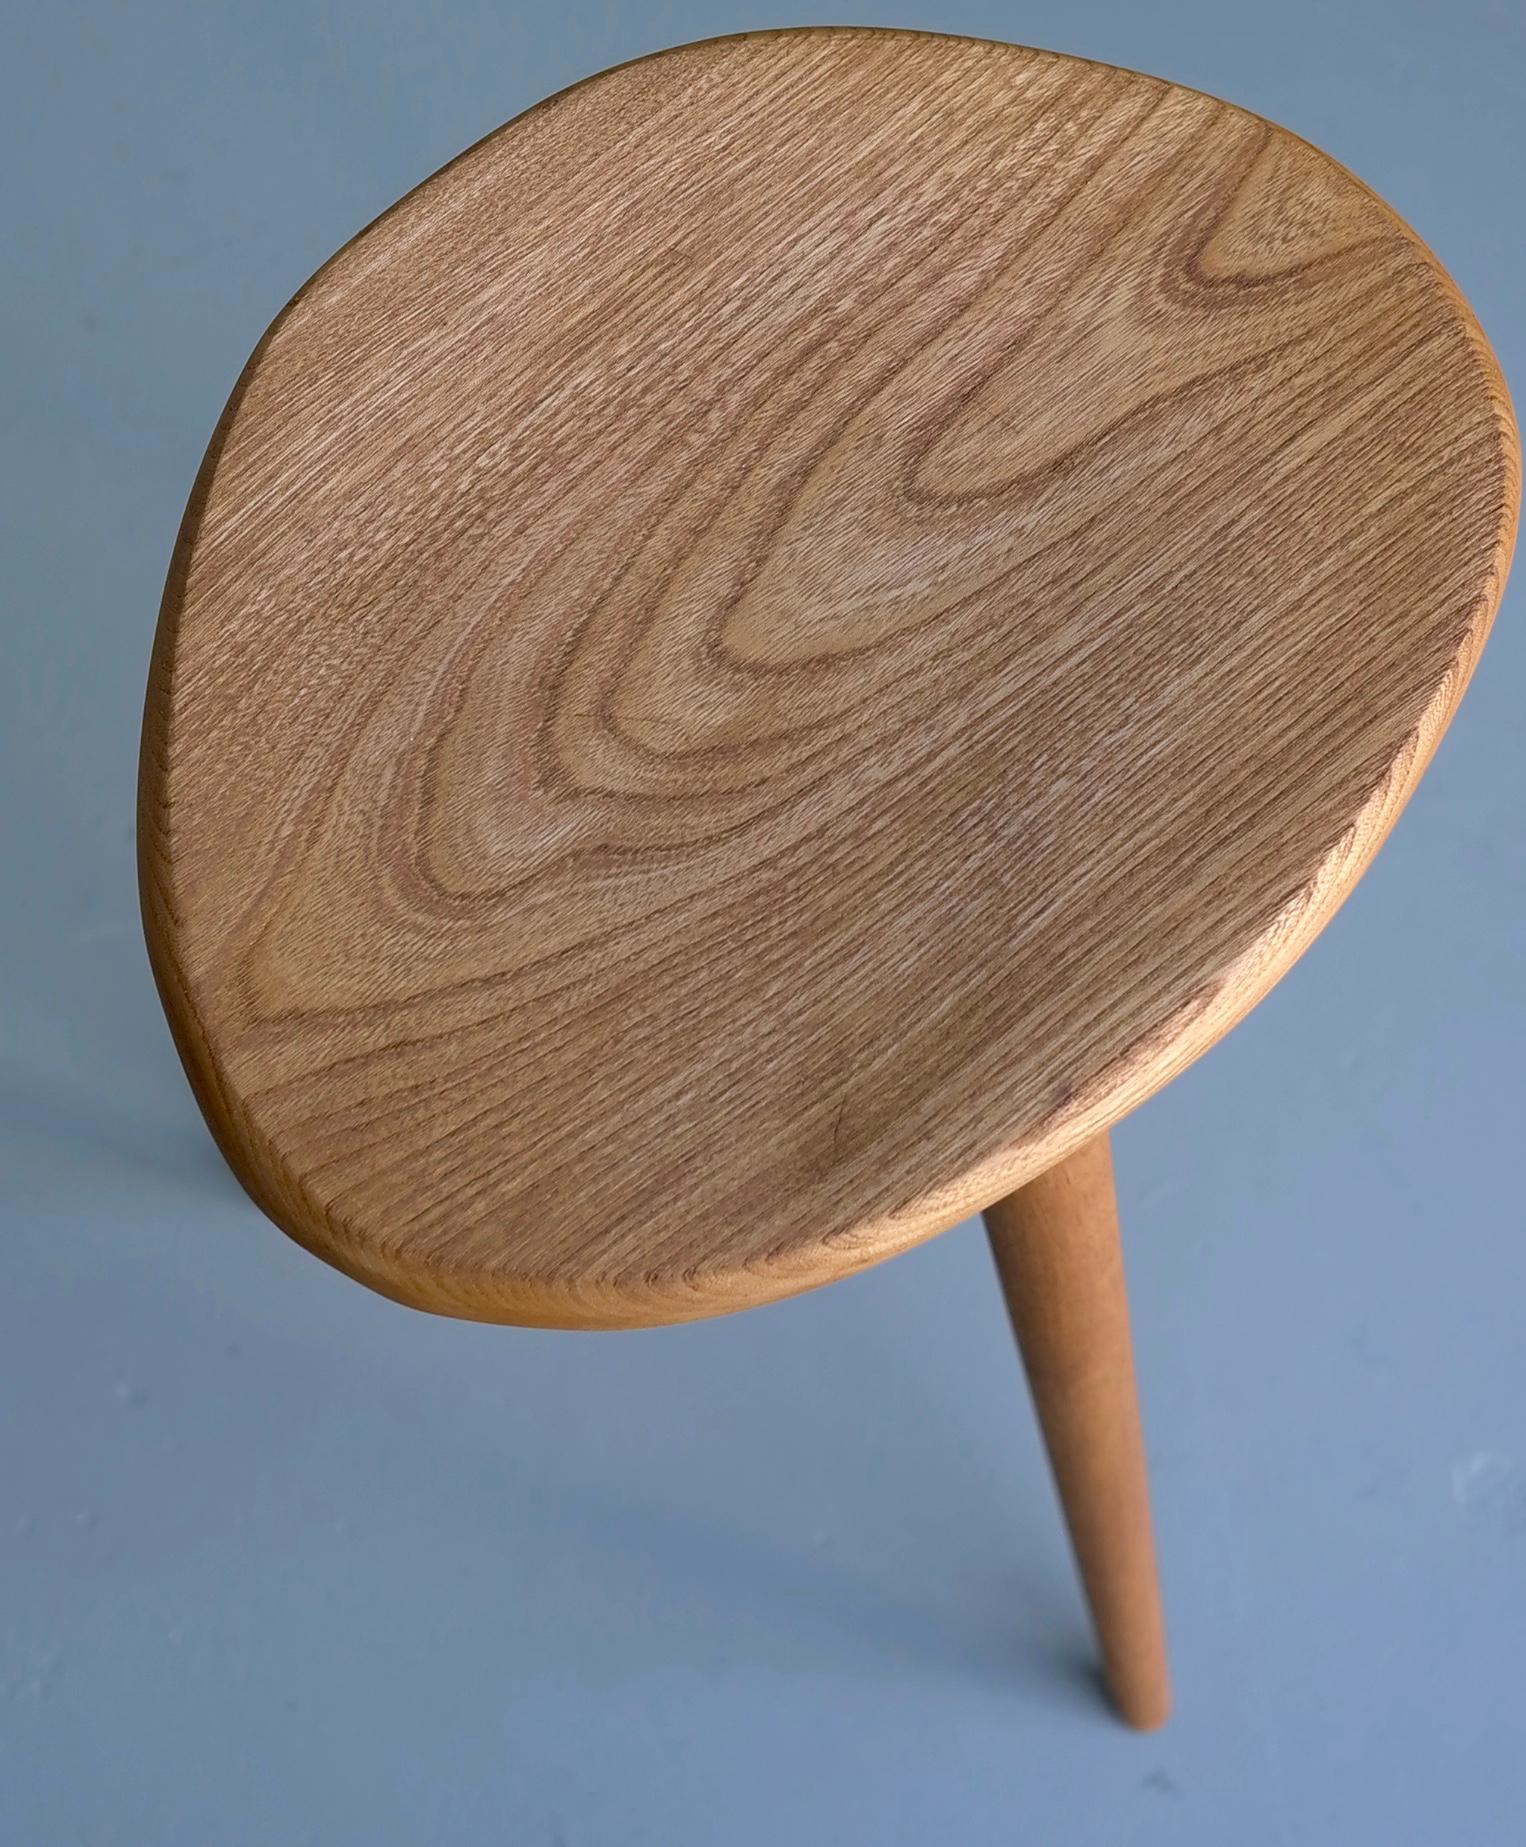 High elegant asymmetric organic stool in solid oak, France, 1950s

Very decorative piece with lovely wood grain.